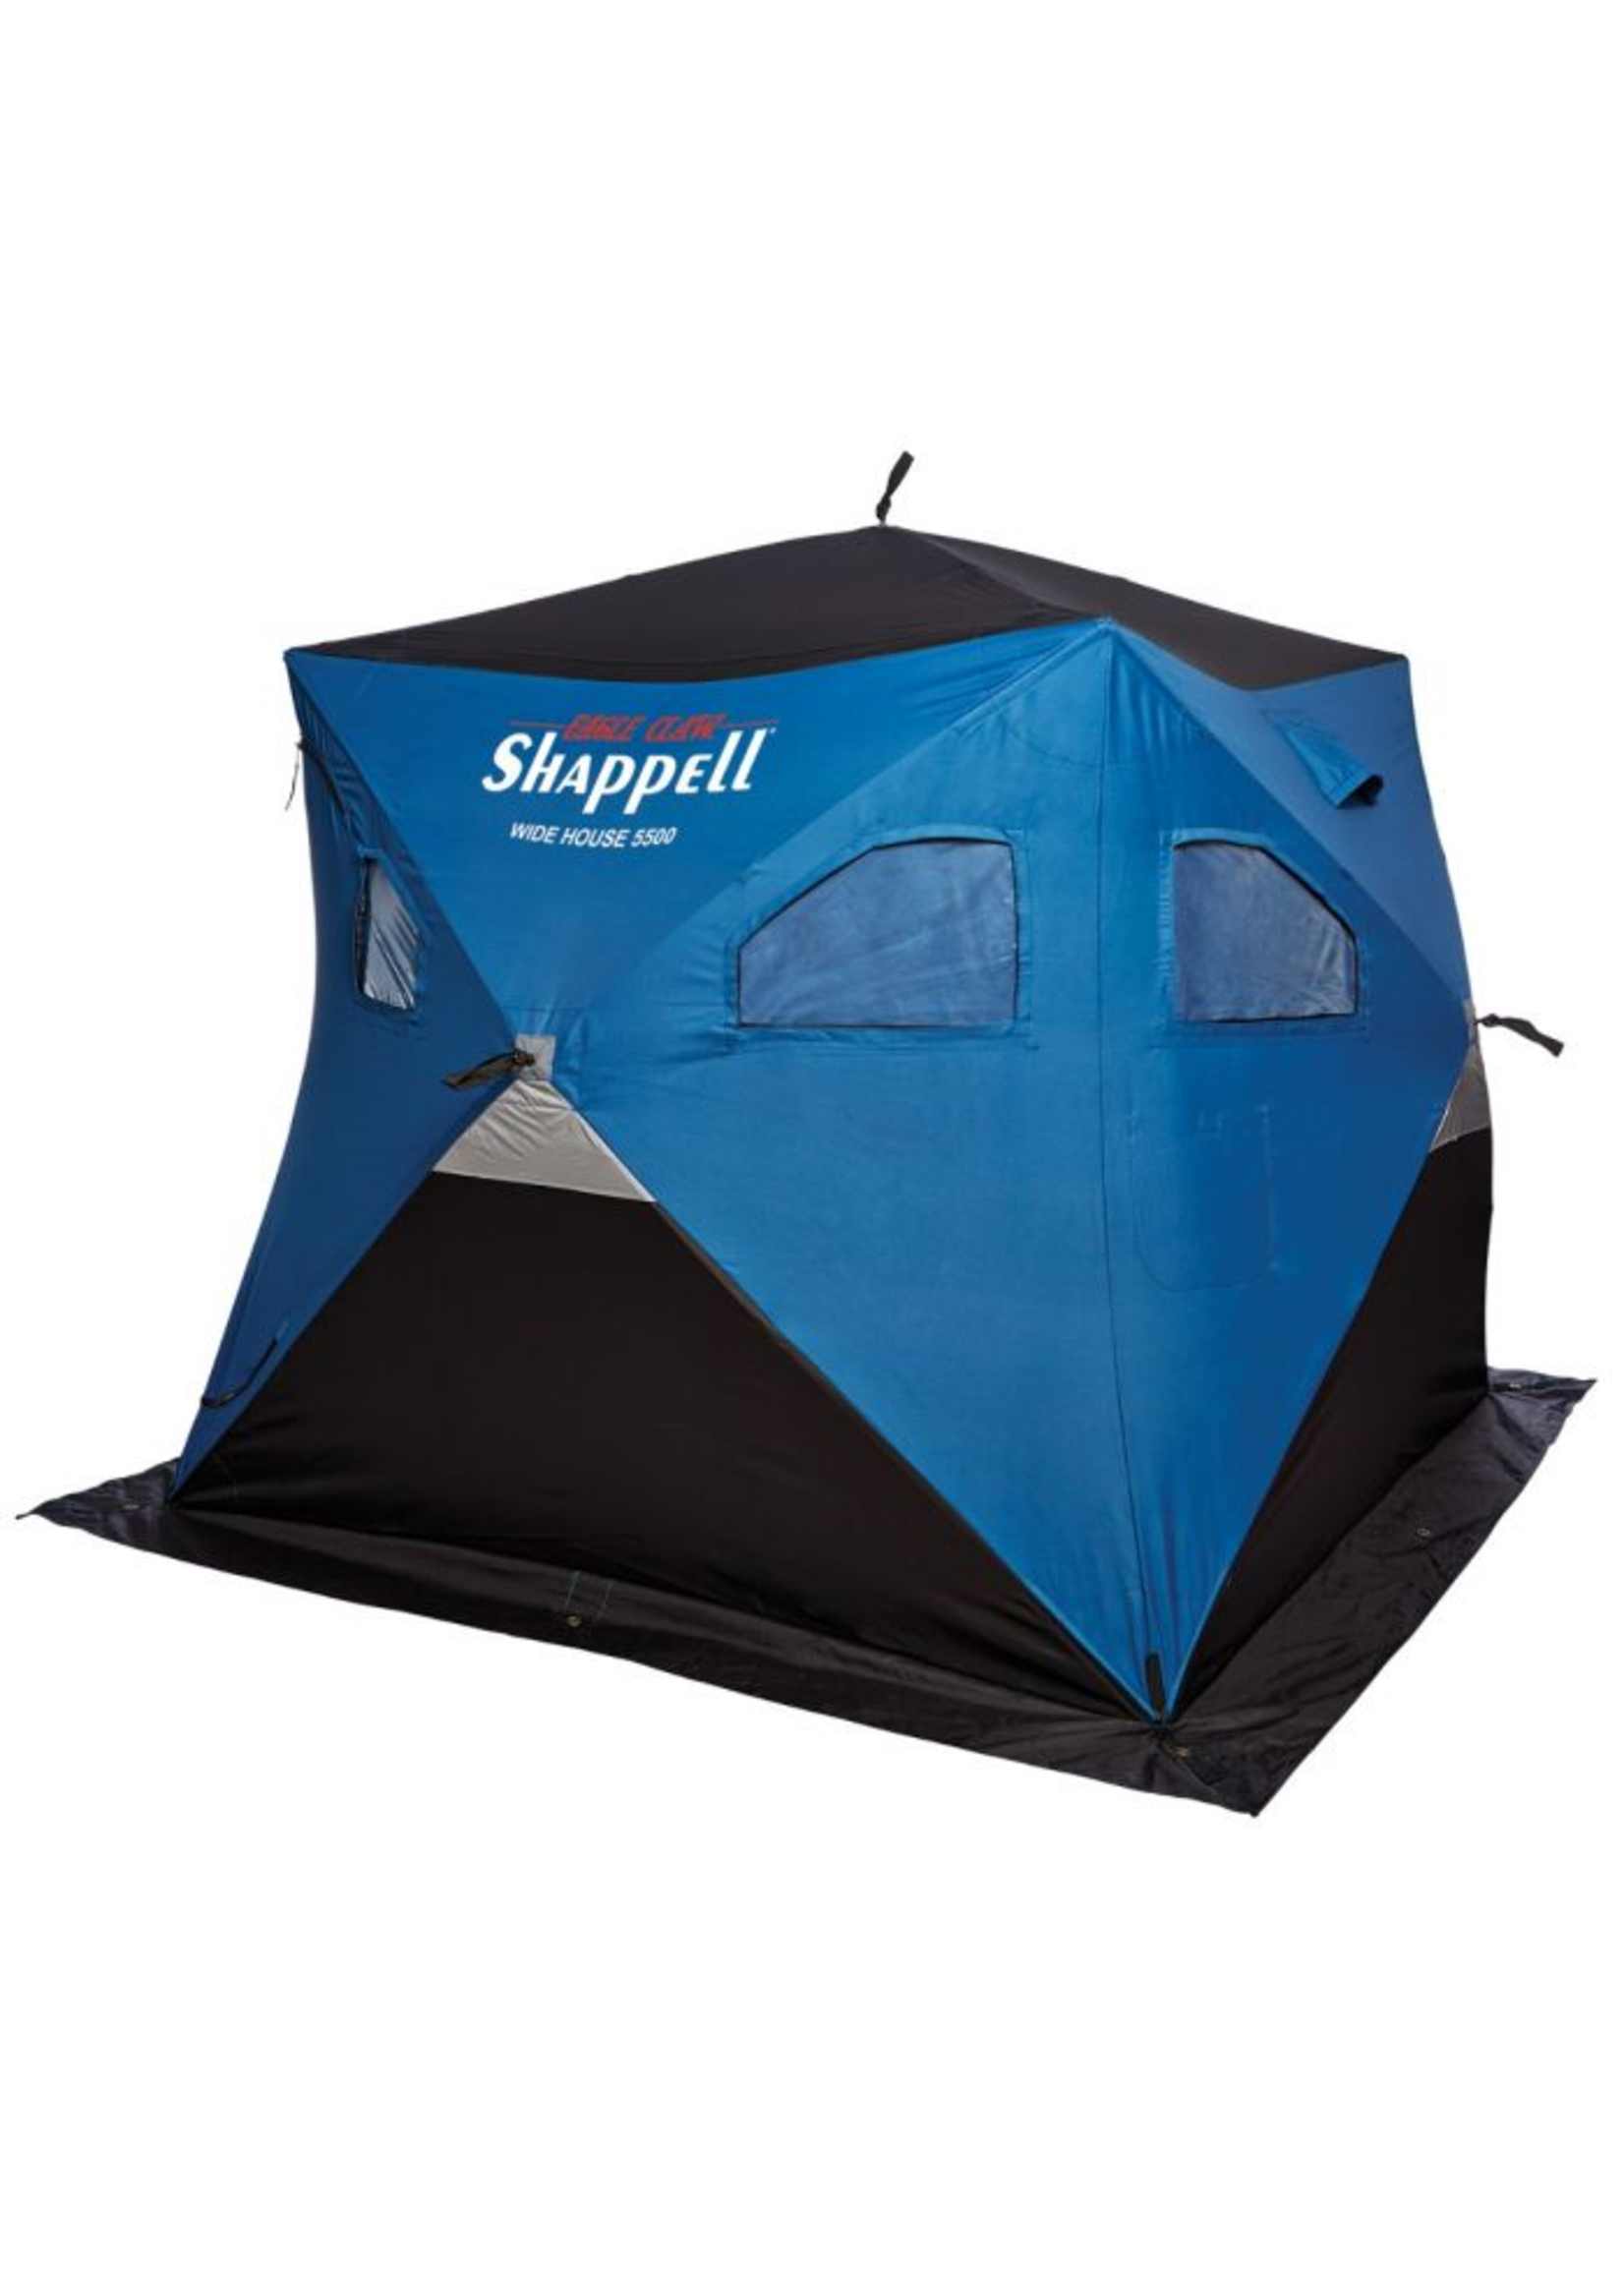 Shappell Shappell Wide House 5500 Ice Fishing Shelter